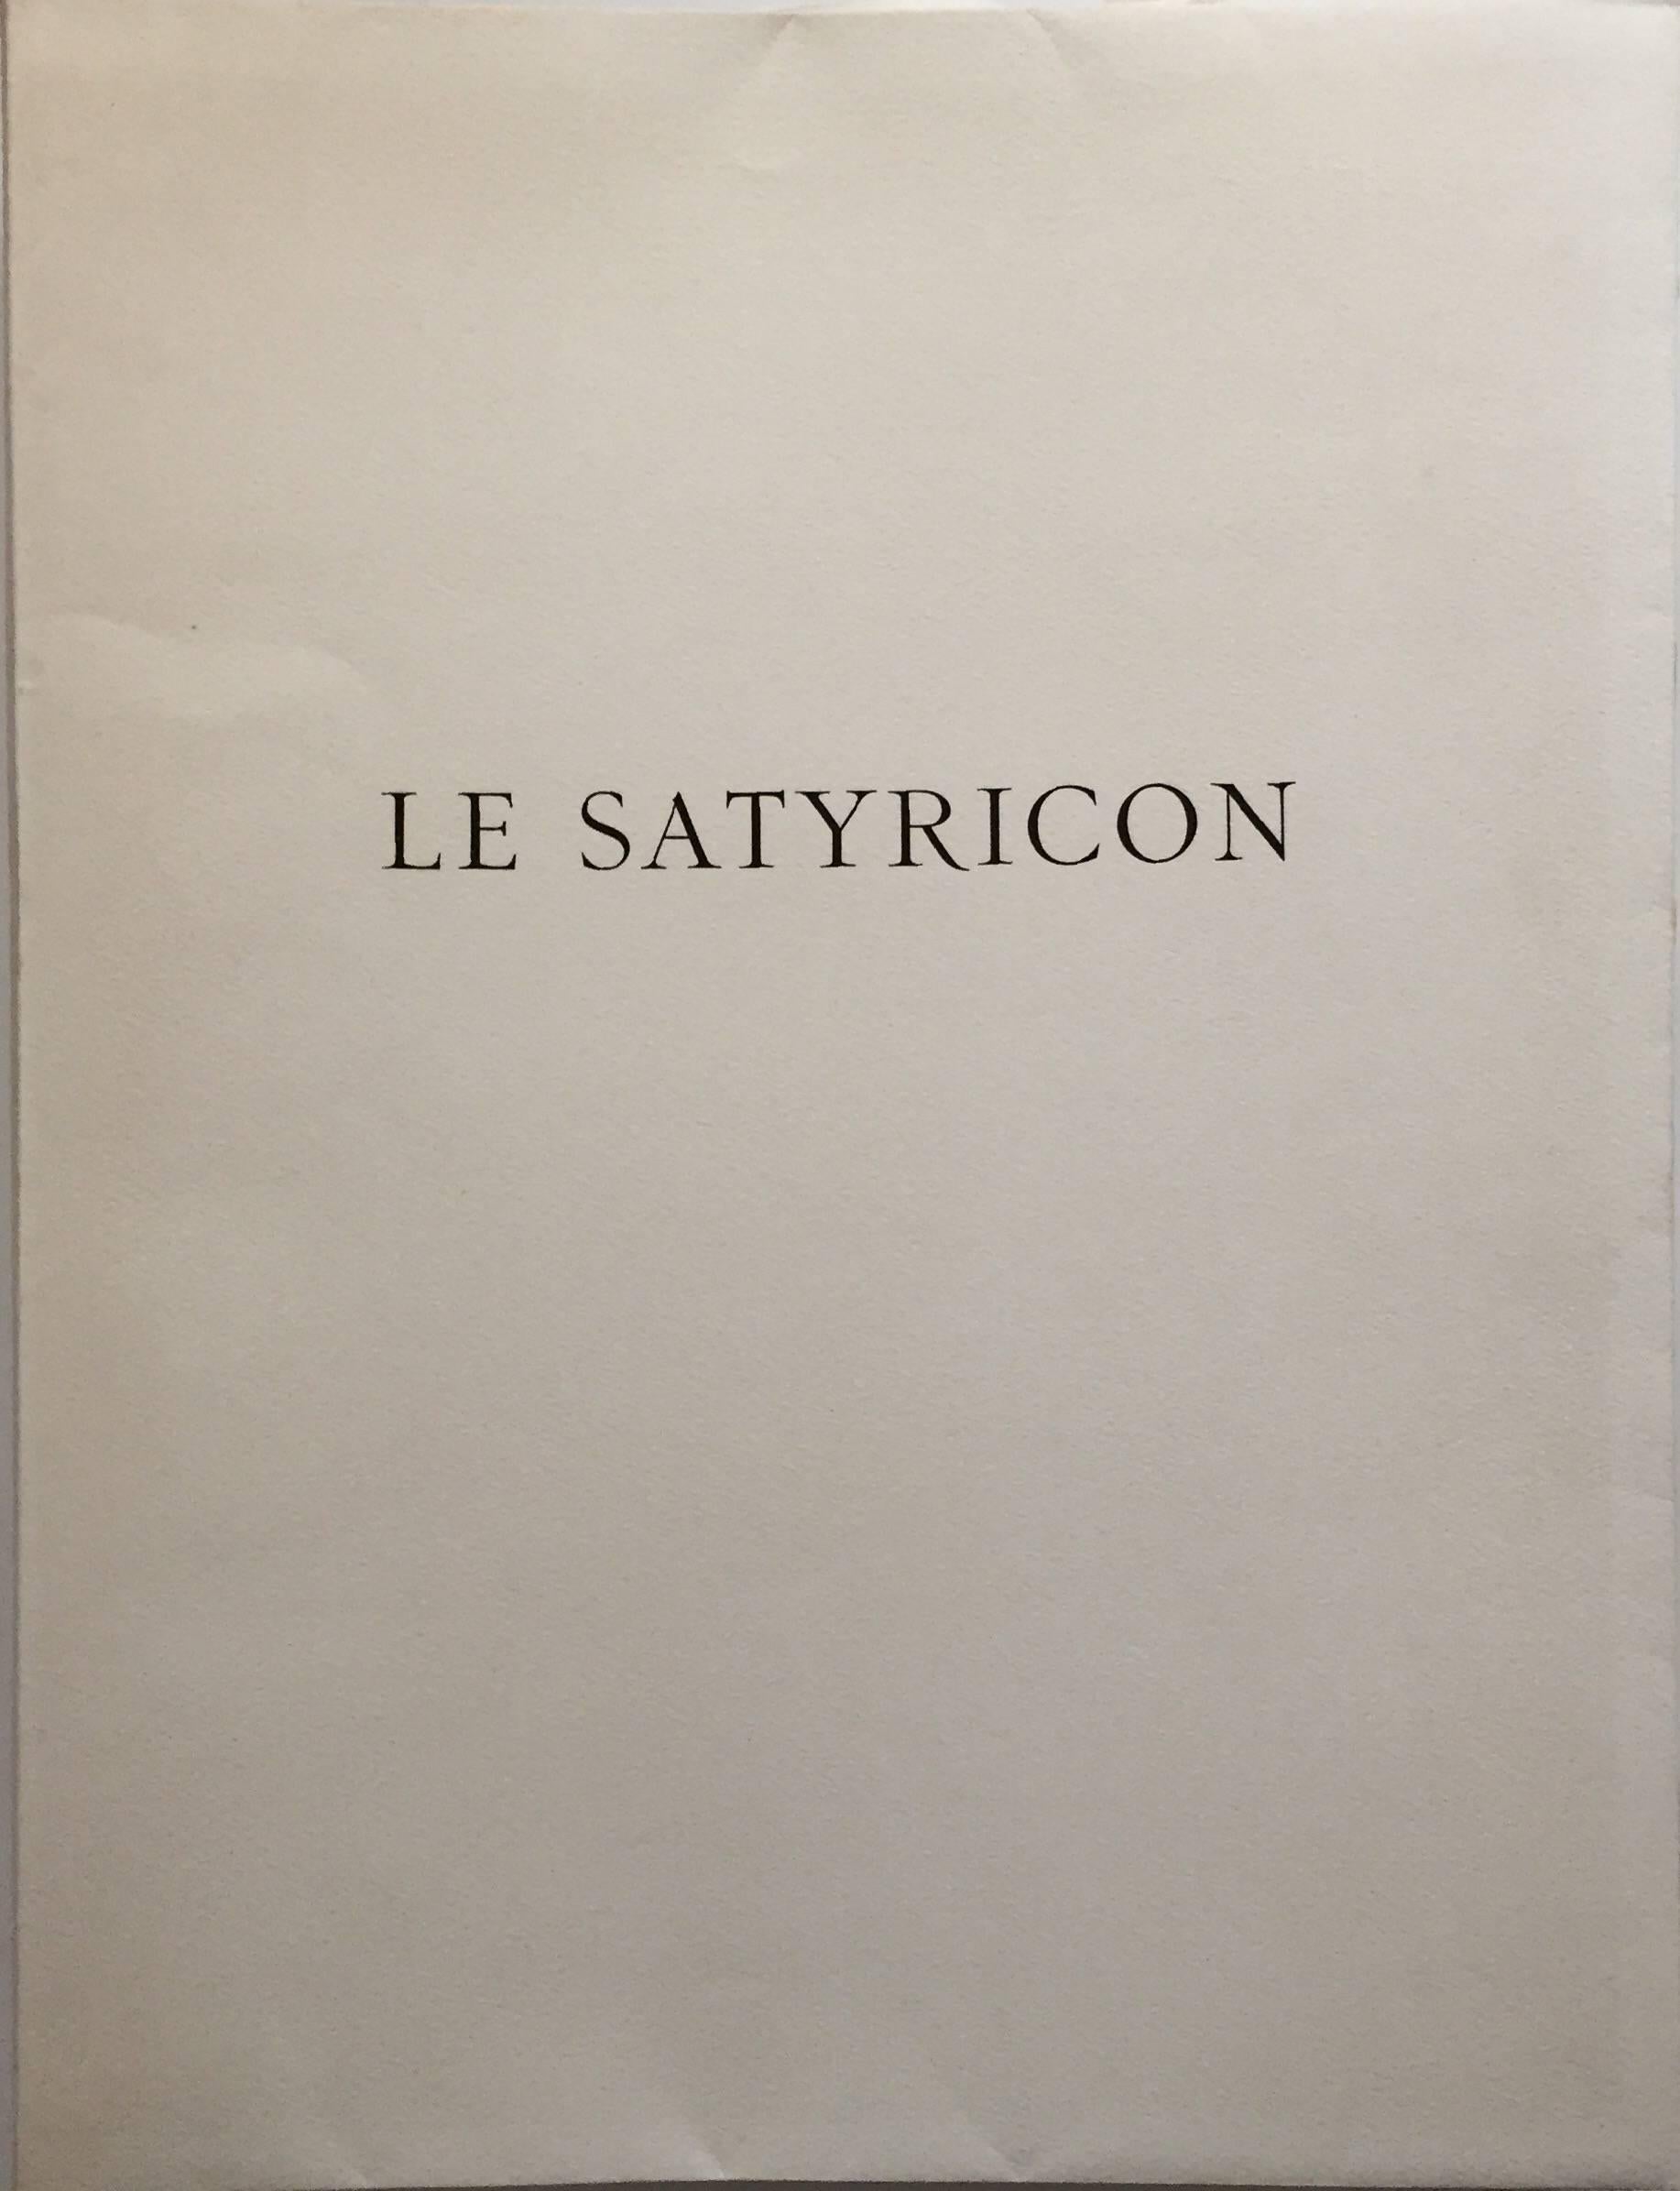 Erotic Etching from Le Satyricon  - Print by André Derain